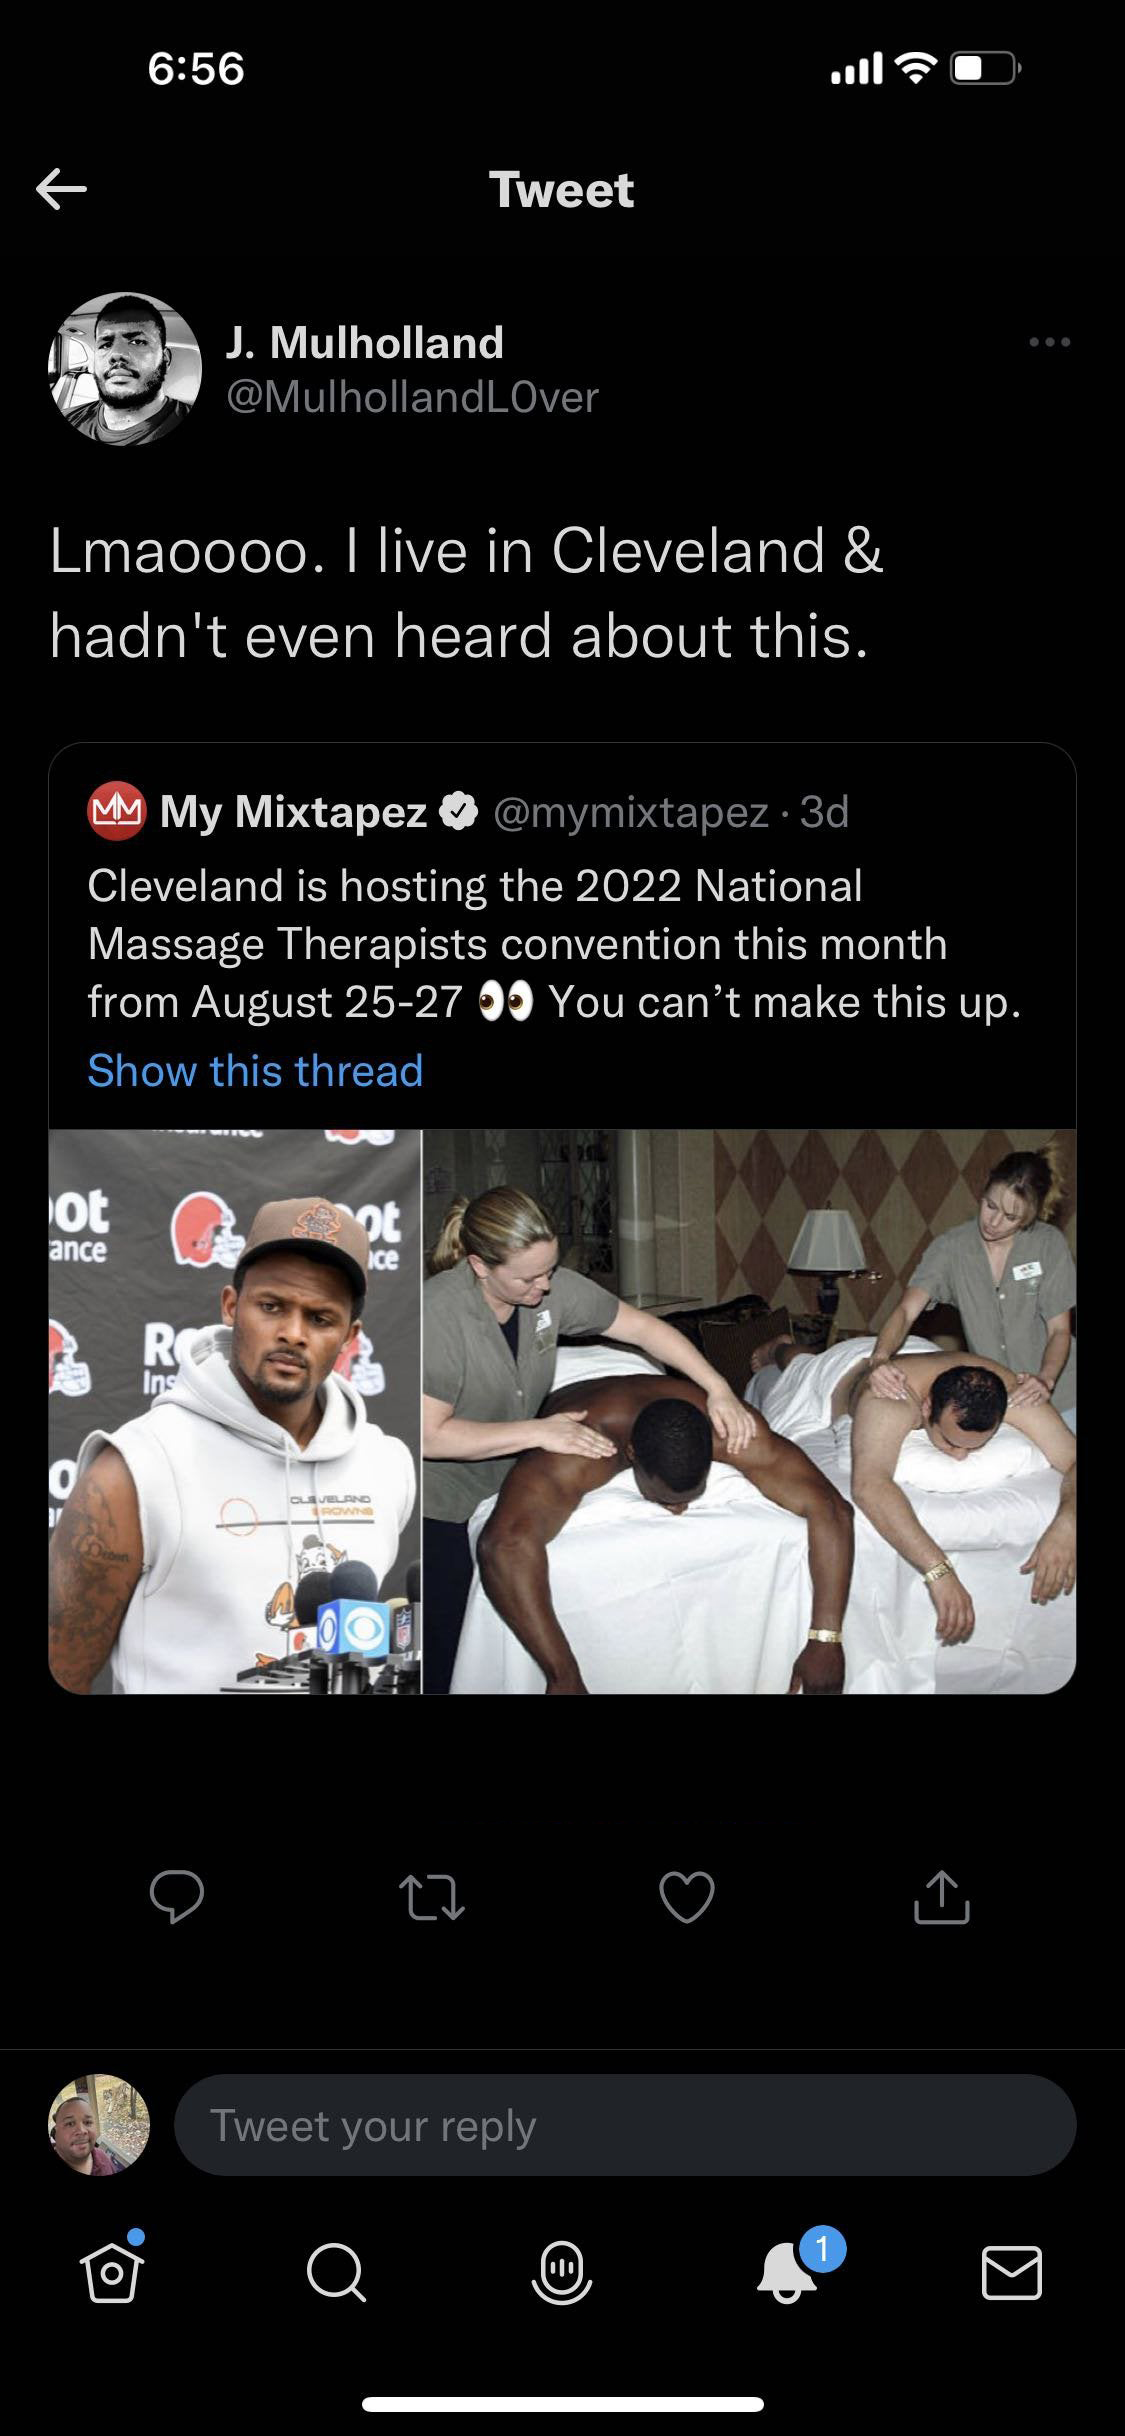 funny tweets - screenshot - ot 0. Tweet J. Mulholland Lmaoooo. I live in Cleveland & hadn't even heard about this. My Mixtapez Cleveland is hosting the 2022 National Massage Therapists convention this month from August 2527 0 You can't make this up. Show 